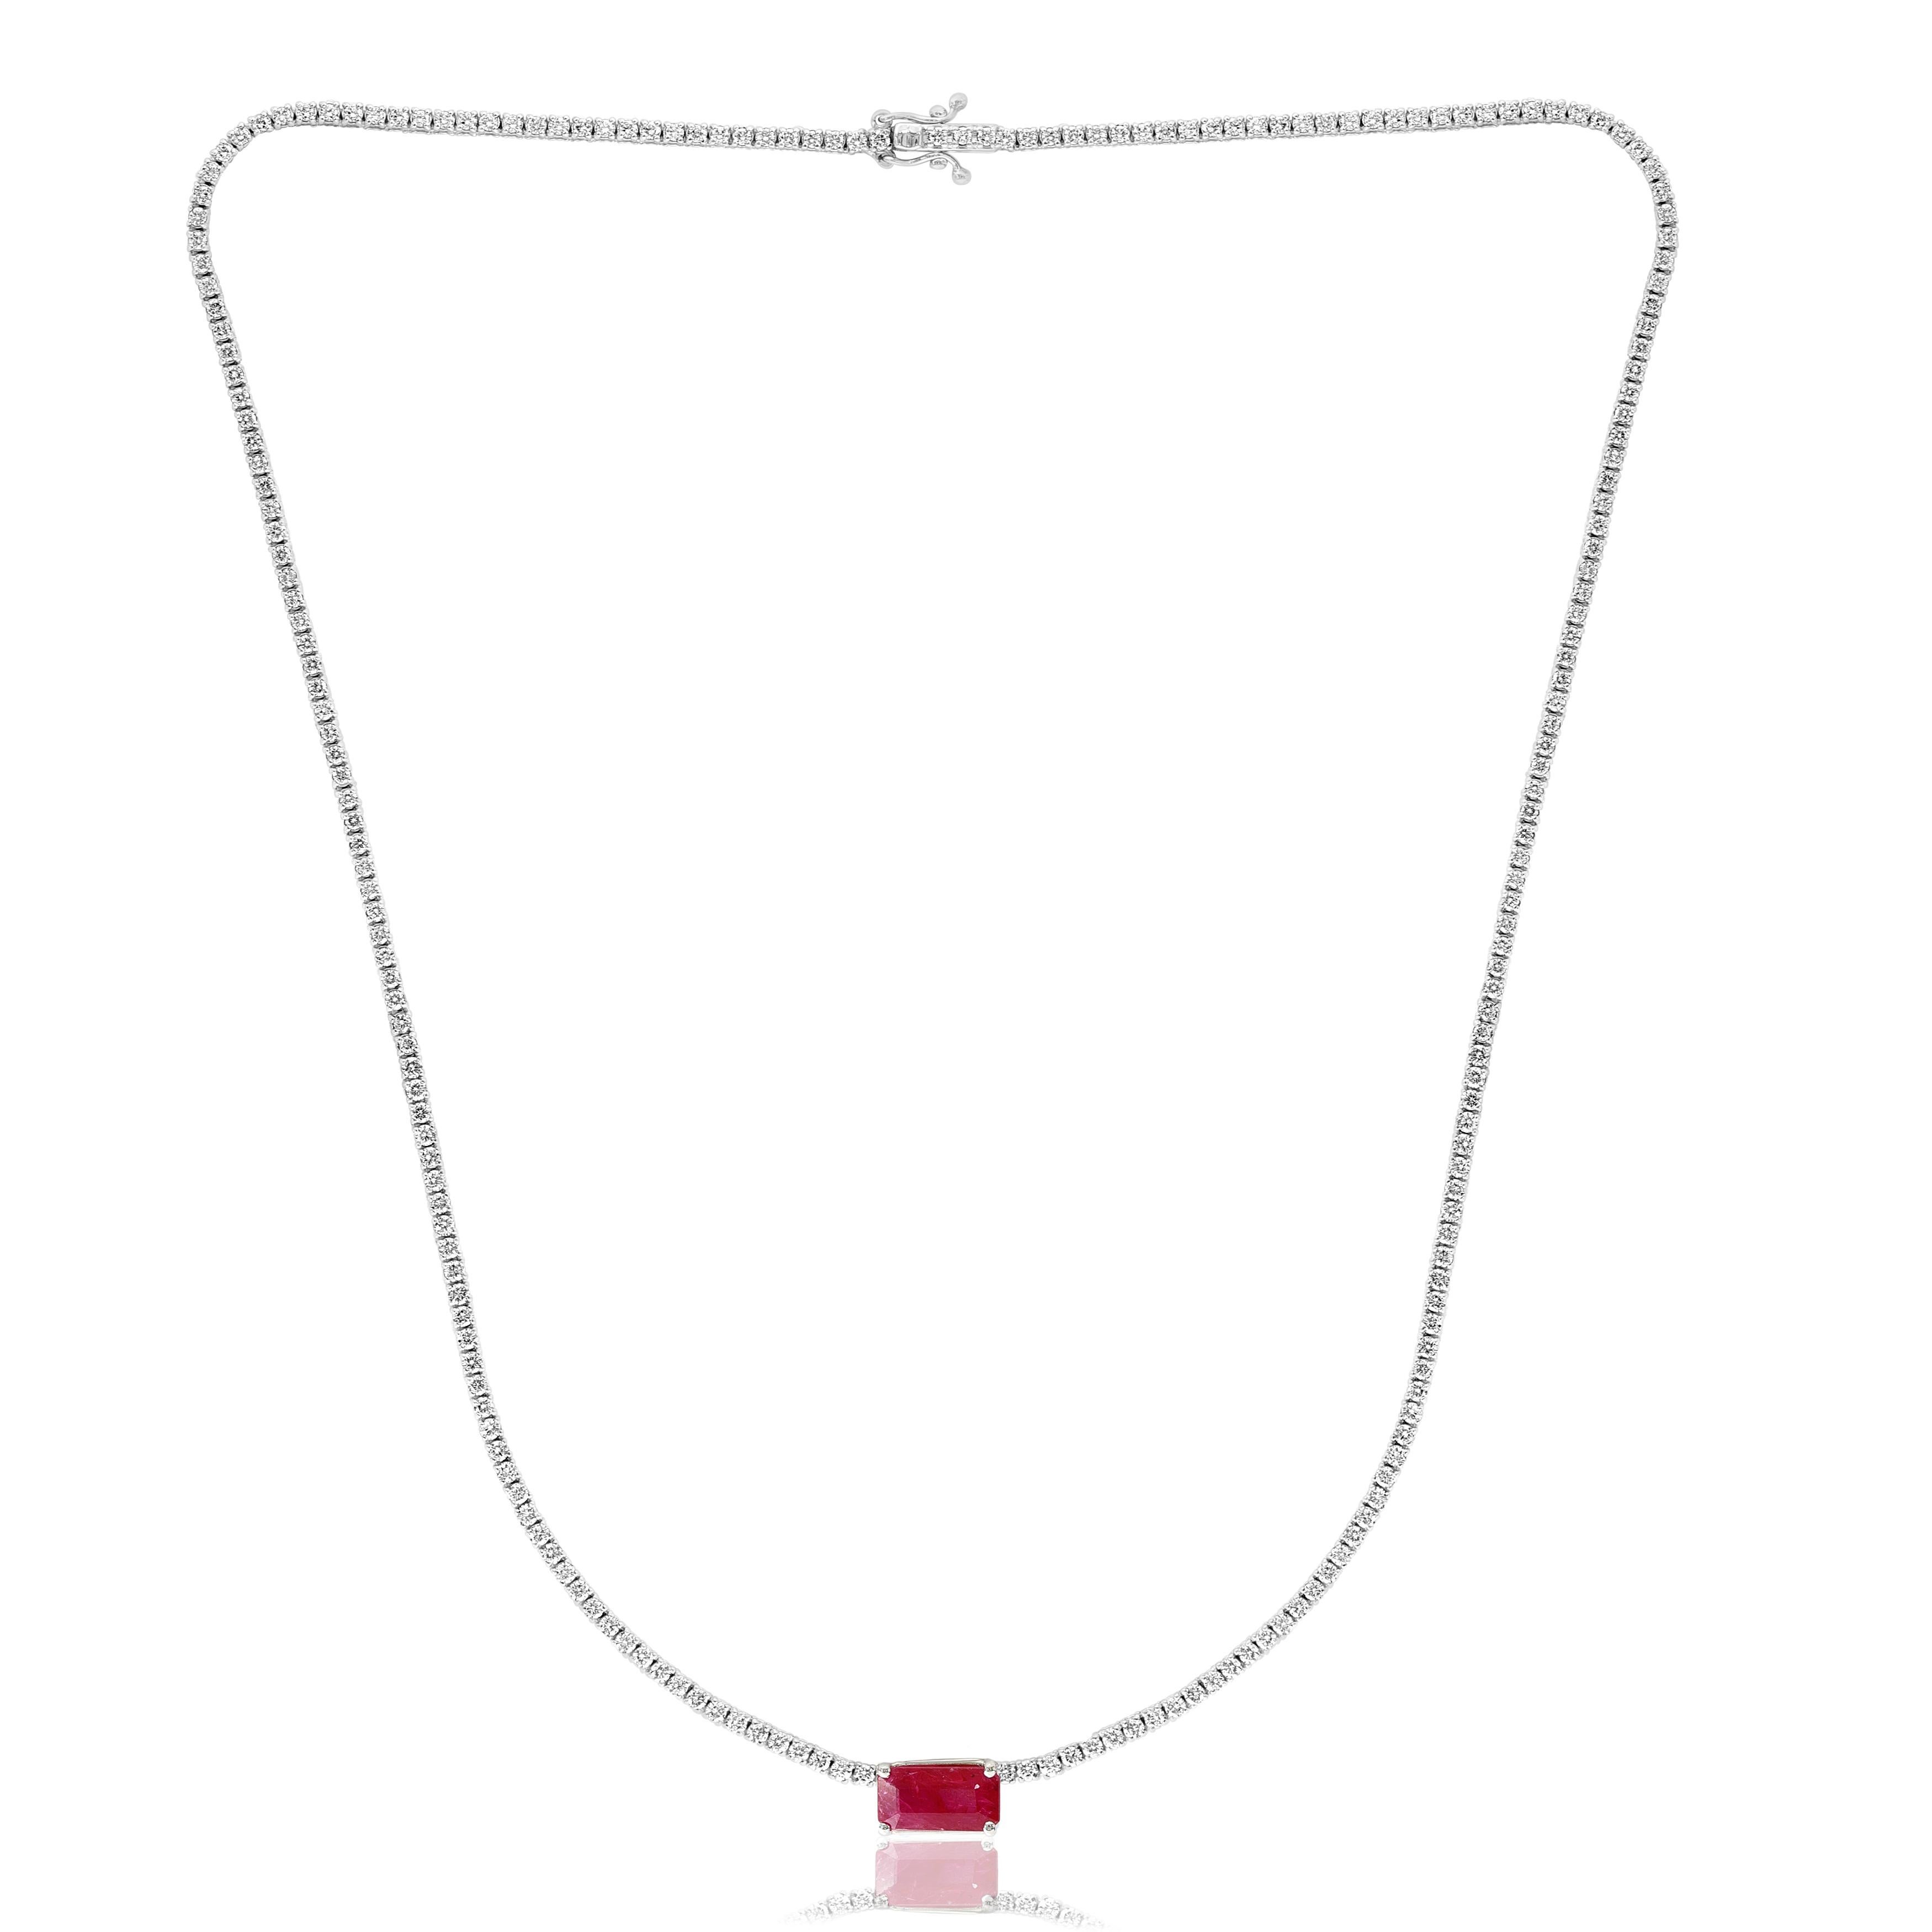 A brilliant and classic piece showcasing emerald cut red ruby in the center weighing 2.63 carats and a line of round diamonds on both sides set in 14K White Gold. 239 diamonds in this necklace are brilliant round cut and weigh 3.01 carats in total.